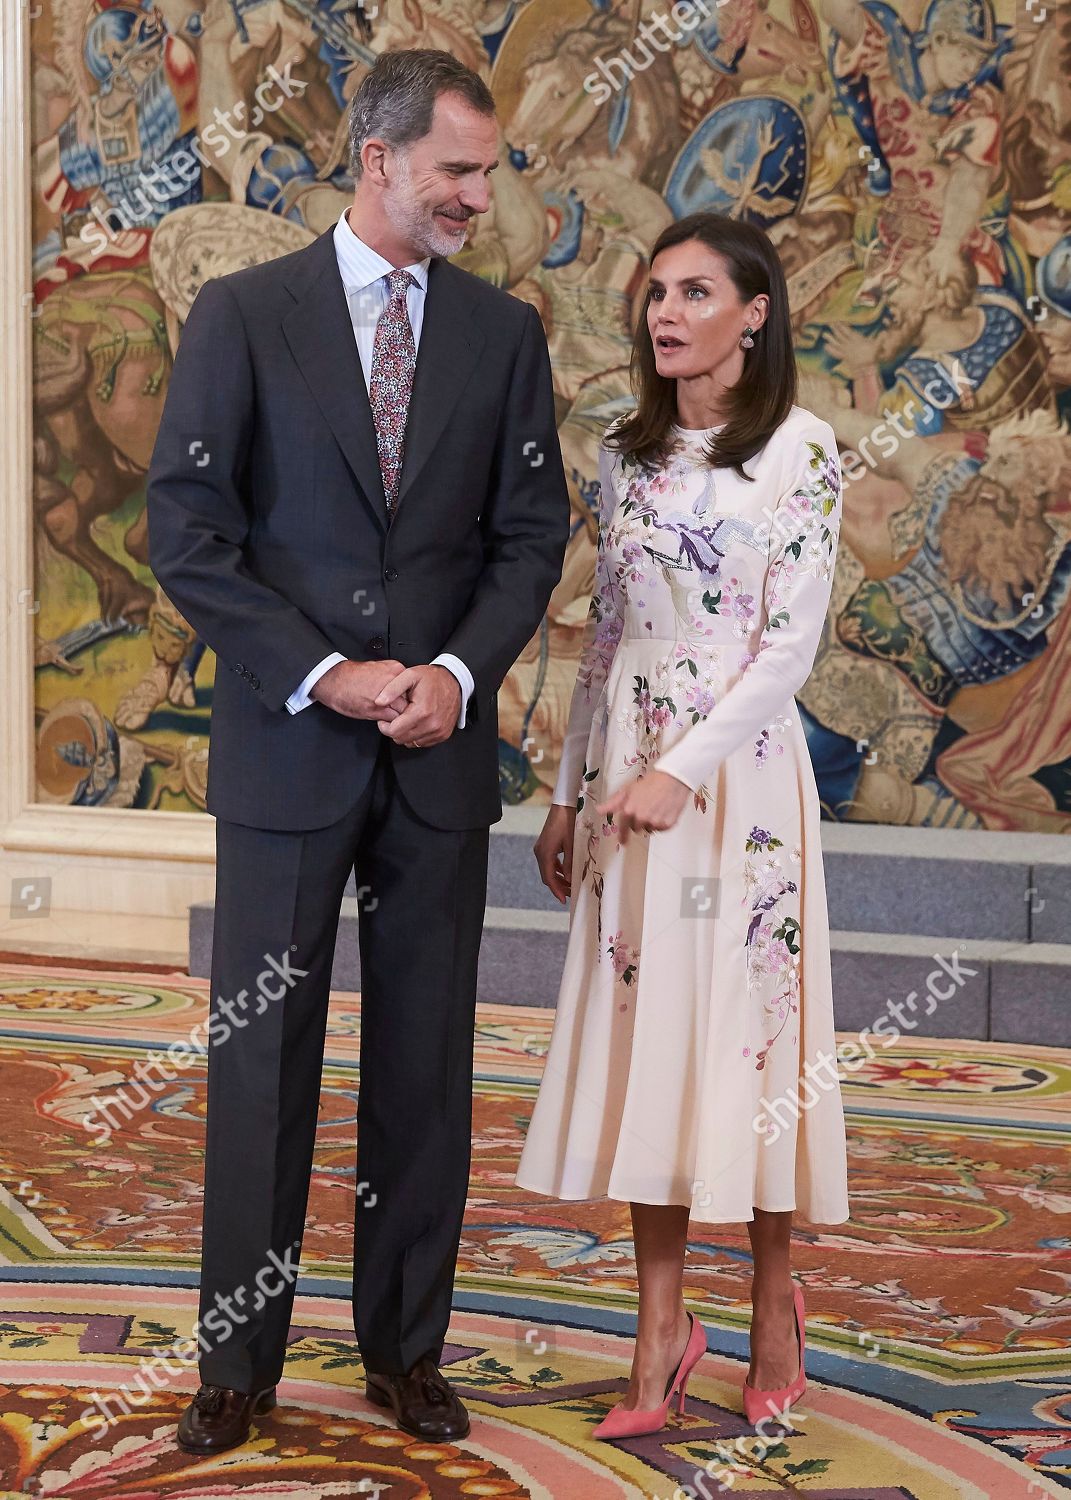 audience-with-spanish-royals-zarzuela-palace-madrid-spain-shutterstock-editorial-10330321d.jpg